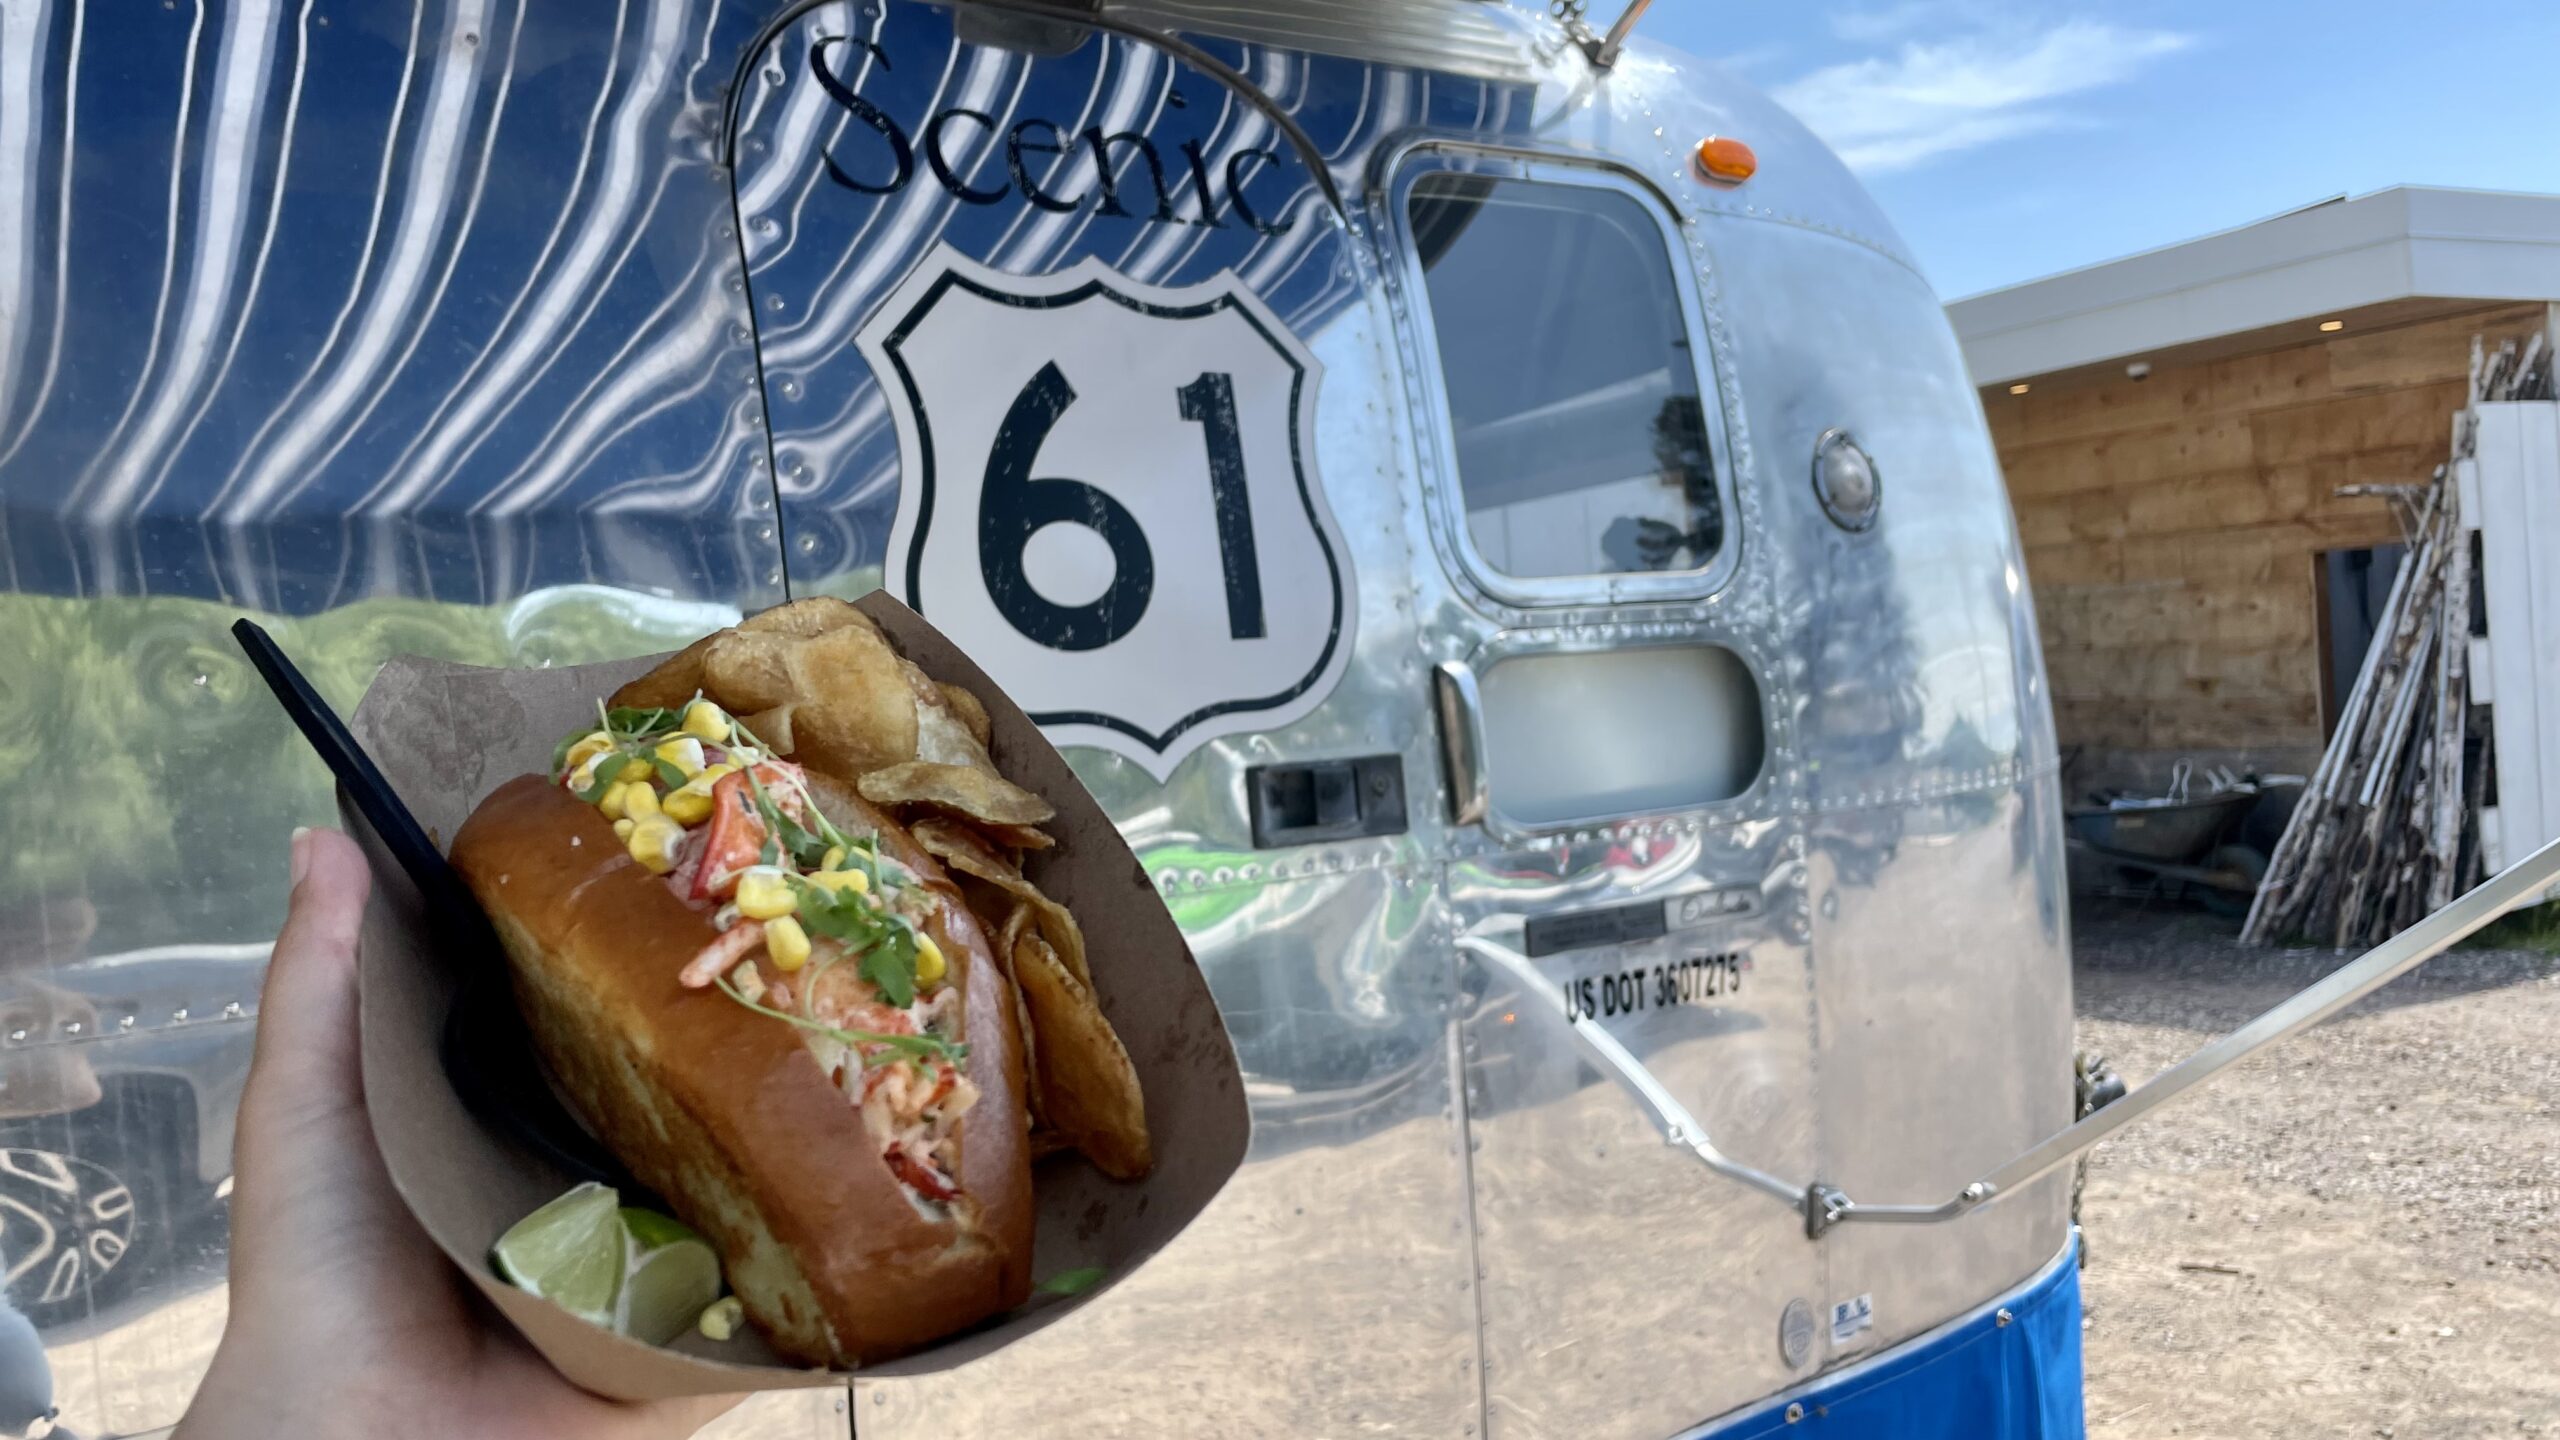 A lobster roll in front of the Scenic 61 food trailer